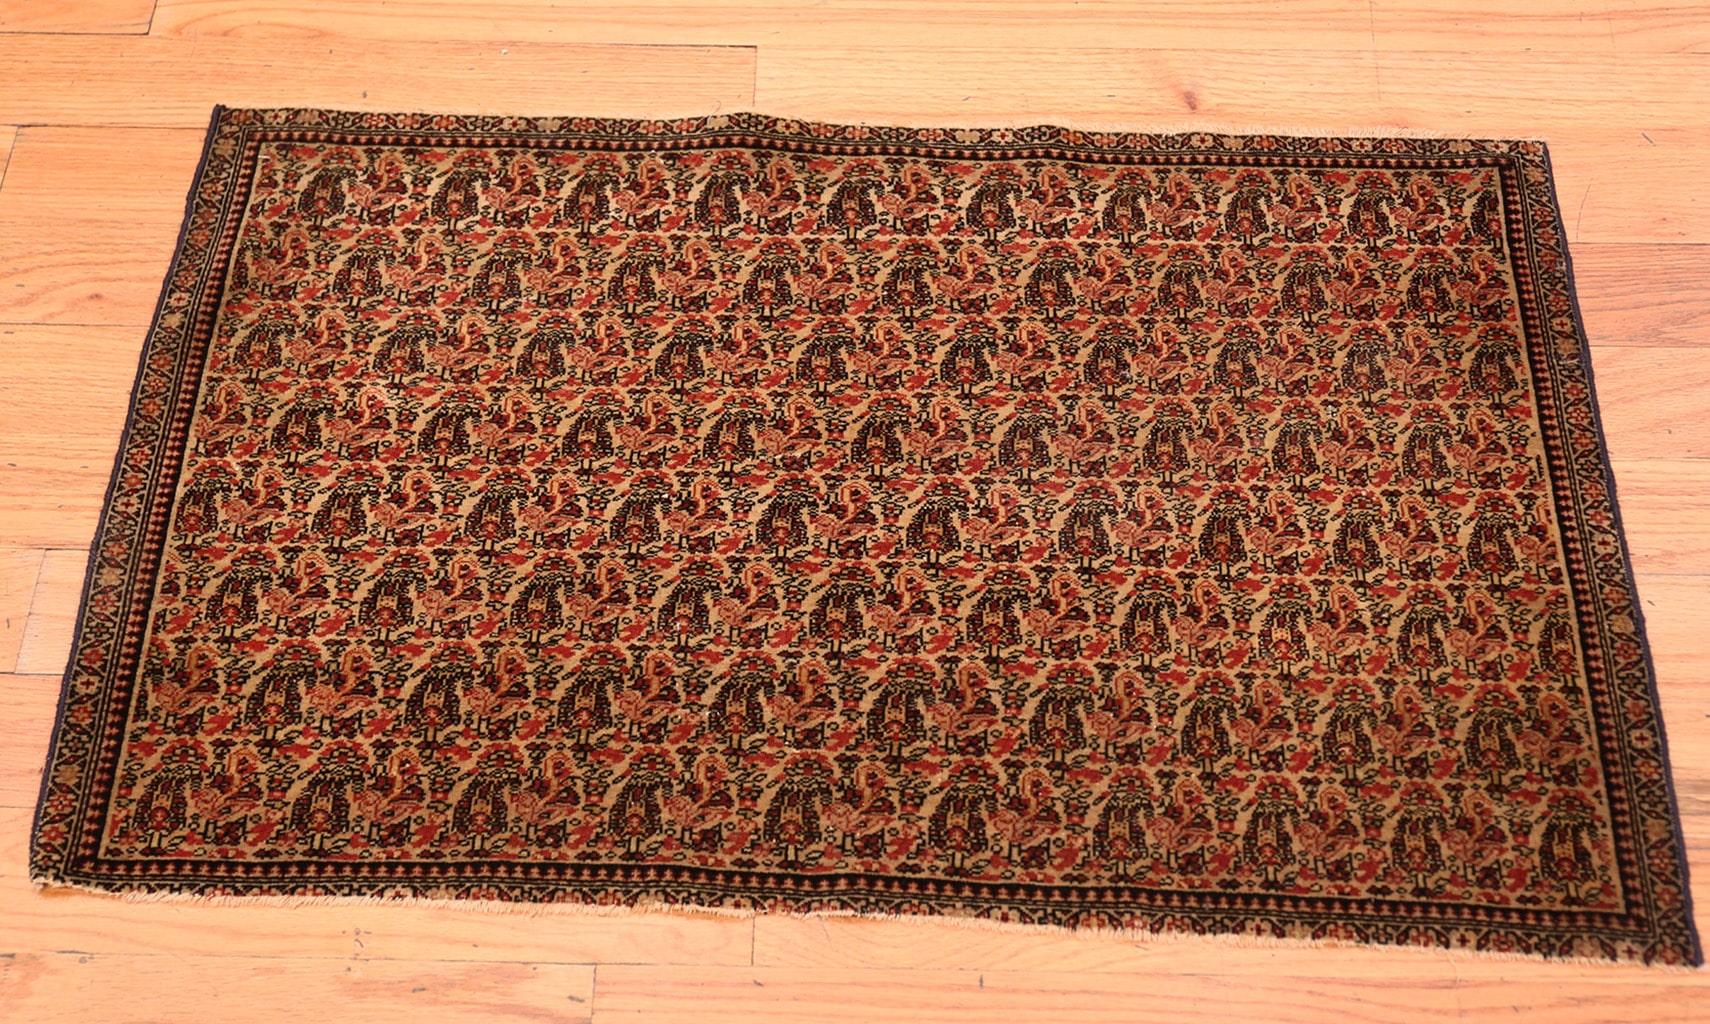 Other Antique Persian Senneh Rug. Size: 3 ft x 1 ft 10 in (0.91 m x 0.56 m)